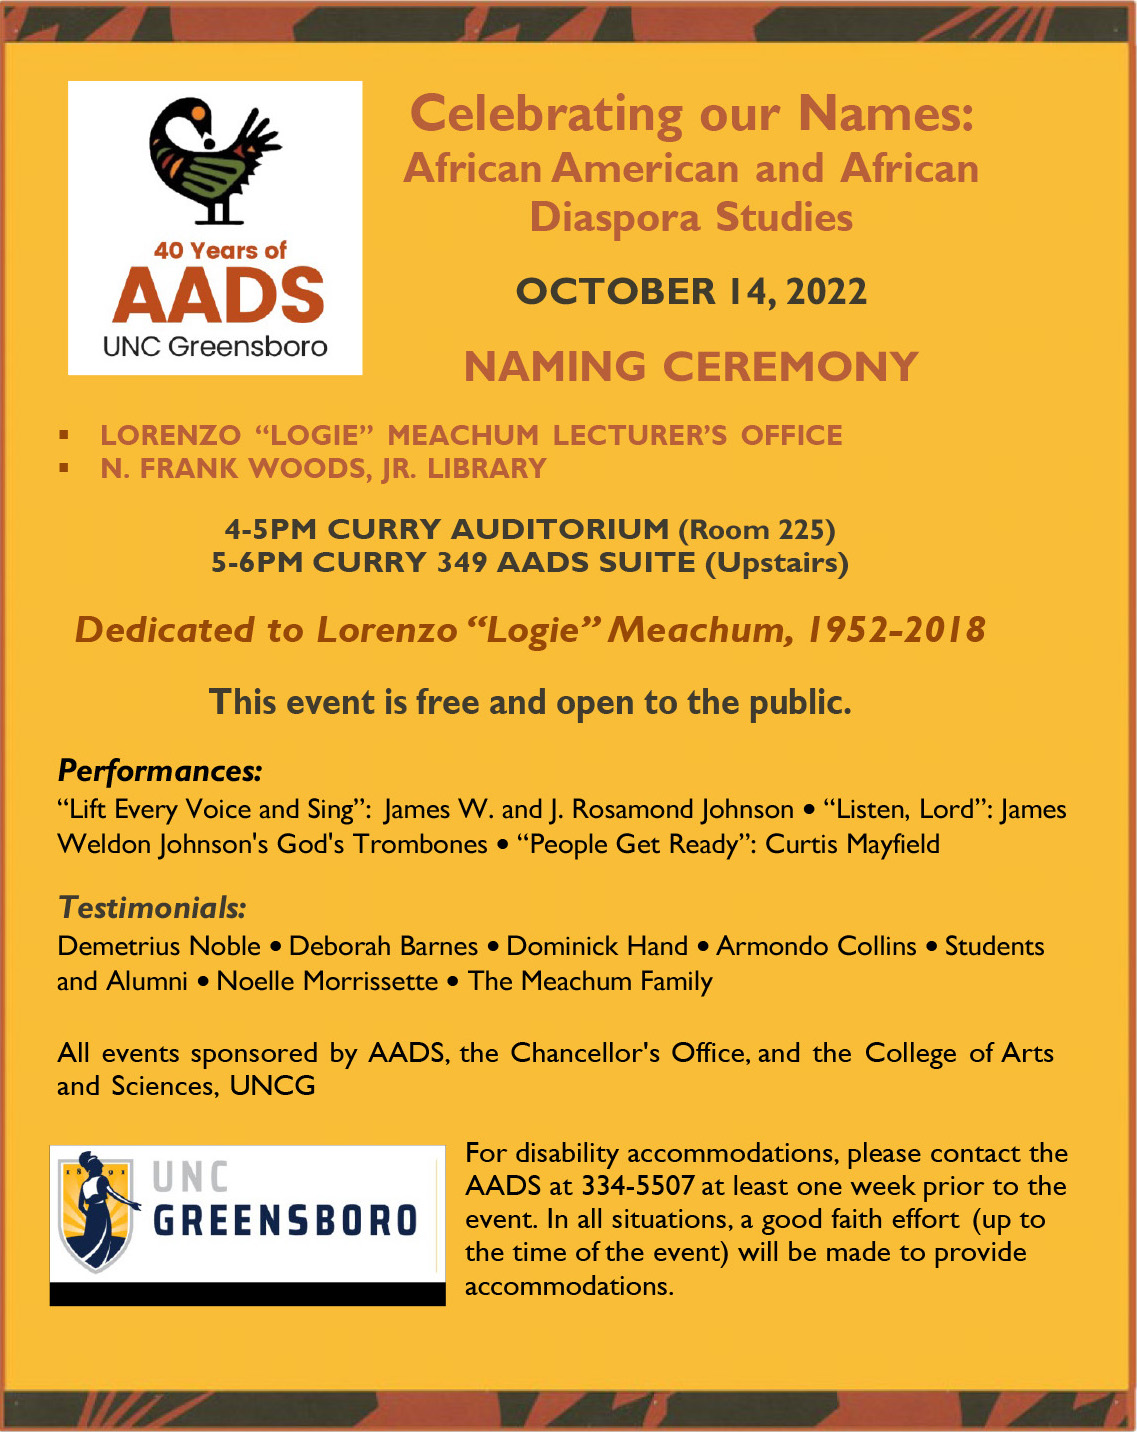 The poster for the AADS library and lecturer's office naming ceremony reads: "Celebrating Our Names: African American and African Diaspora Studies - October 14, 2022 Naming Ceremony - Lorenzo "Logie" Meachum Lecturer's Office & N. Frank Woods, Jr. Library - 4-5pm Curry Auditorium (Room 225) & 5-6pm Curry 349 AADS Suite (Upstairs) - Dedicated to Lorenzo "Logie" Meachum 1952-2018 - This event is free and open to the public - Performances: "Lift Every Voice and Sing": James W. and J. Rosamond Johnson • "Listen, Lord": James Weldon Johnson's God's Trombones • "People Get Ready": Curtis Mayfield & Testimonials: Demetrius Noble, Deborah Barnes, Dominick Hand, Armondo Collins, Students and Alumni, Noelle Morrissette, The Meachum Family - All events sponsored by AADS, the Chancellor's Office, and the College of Arts and Sciences, UNCG - For disability accommodates, please contact the AADS at 334-5507 at least one week prior to the event. In All situations, a good faith effort (up to the time of the event) will be made to provide accommodations."